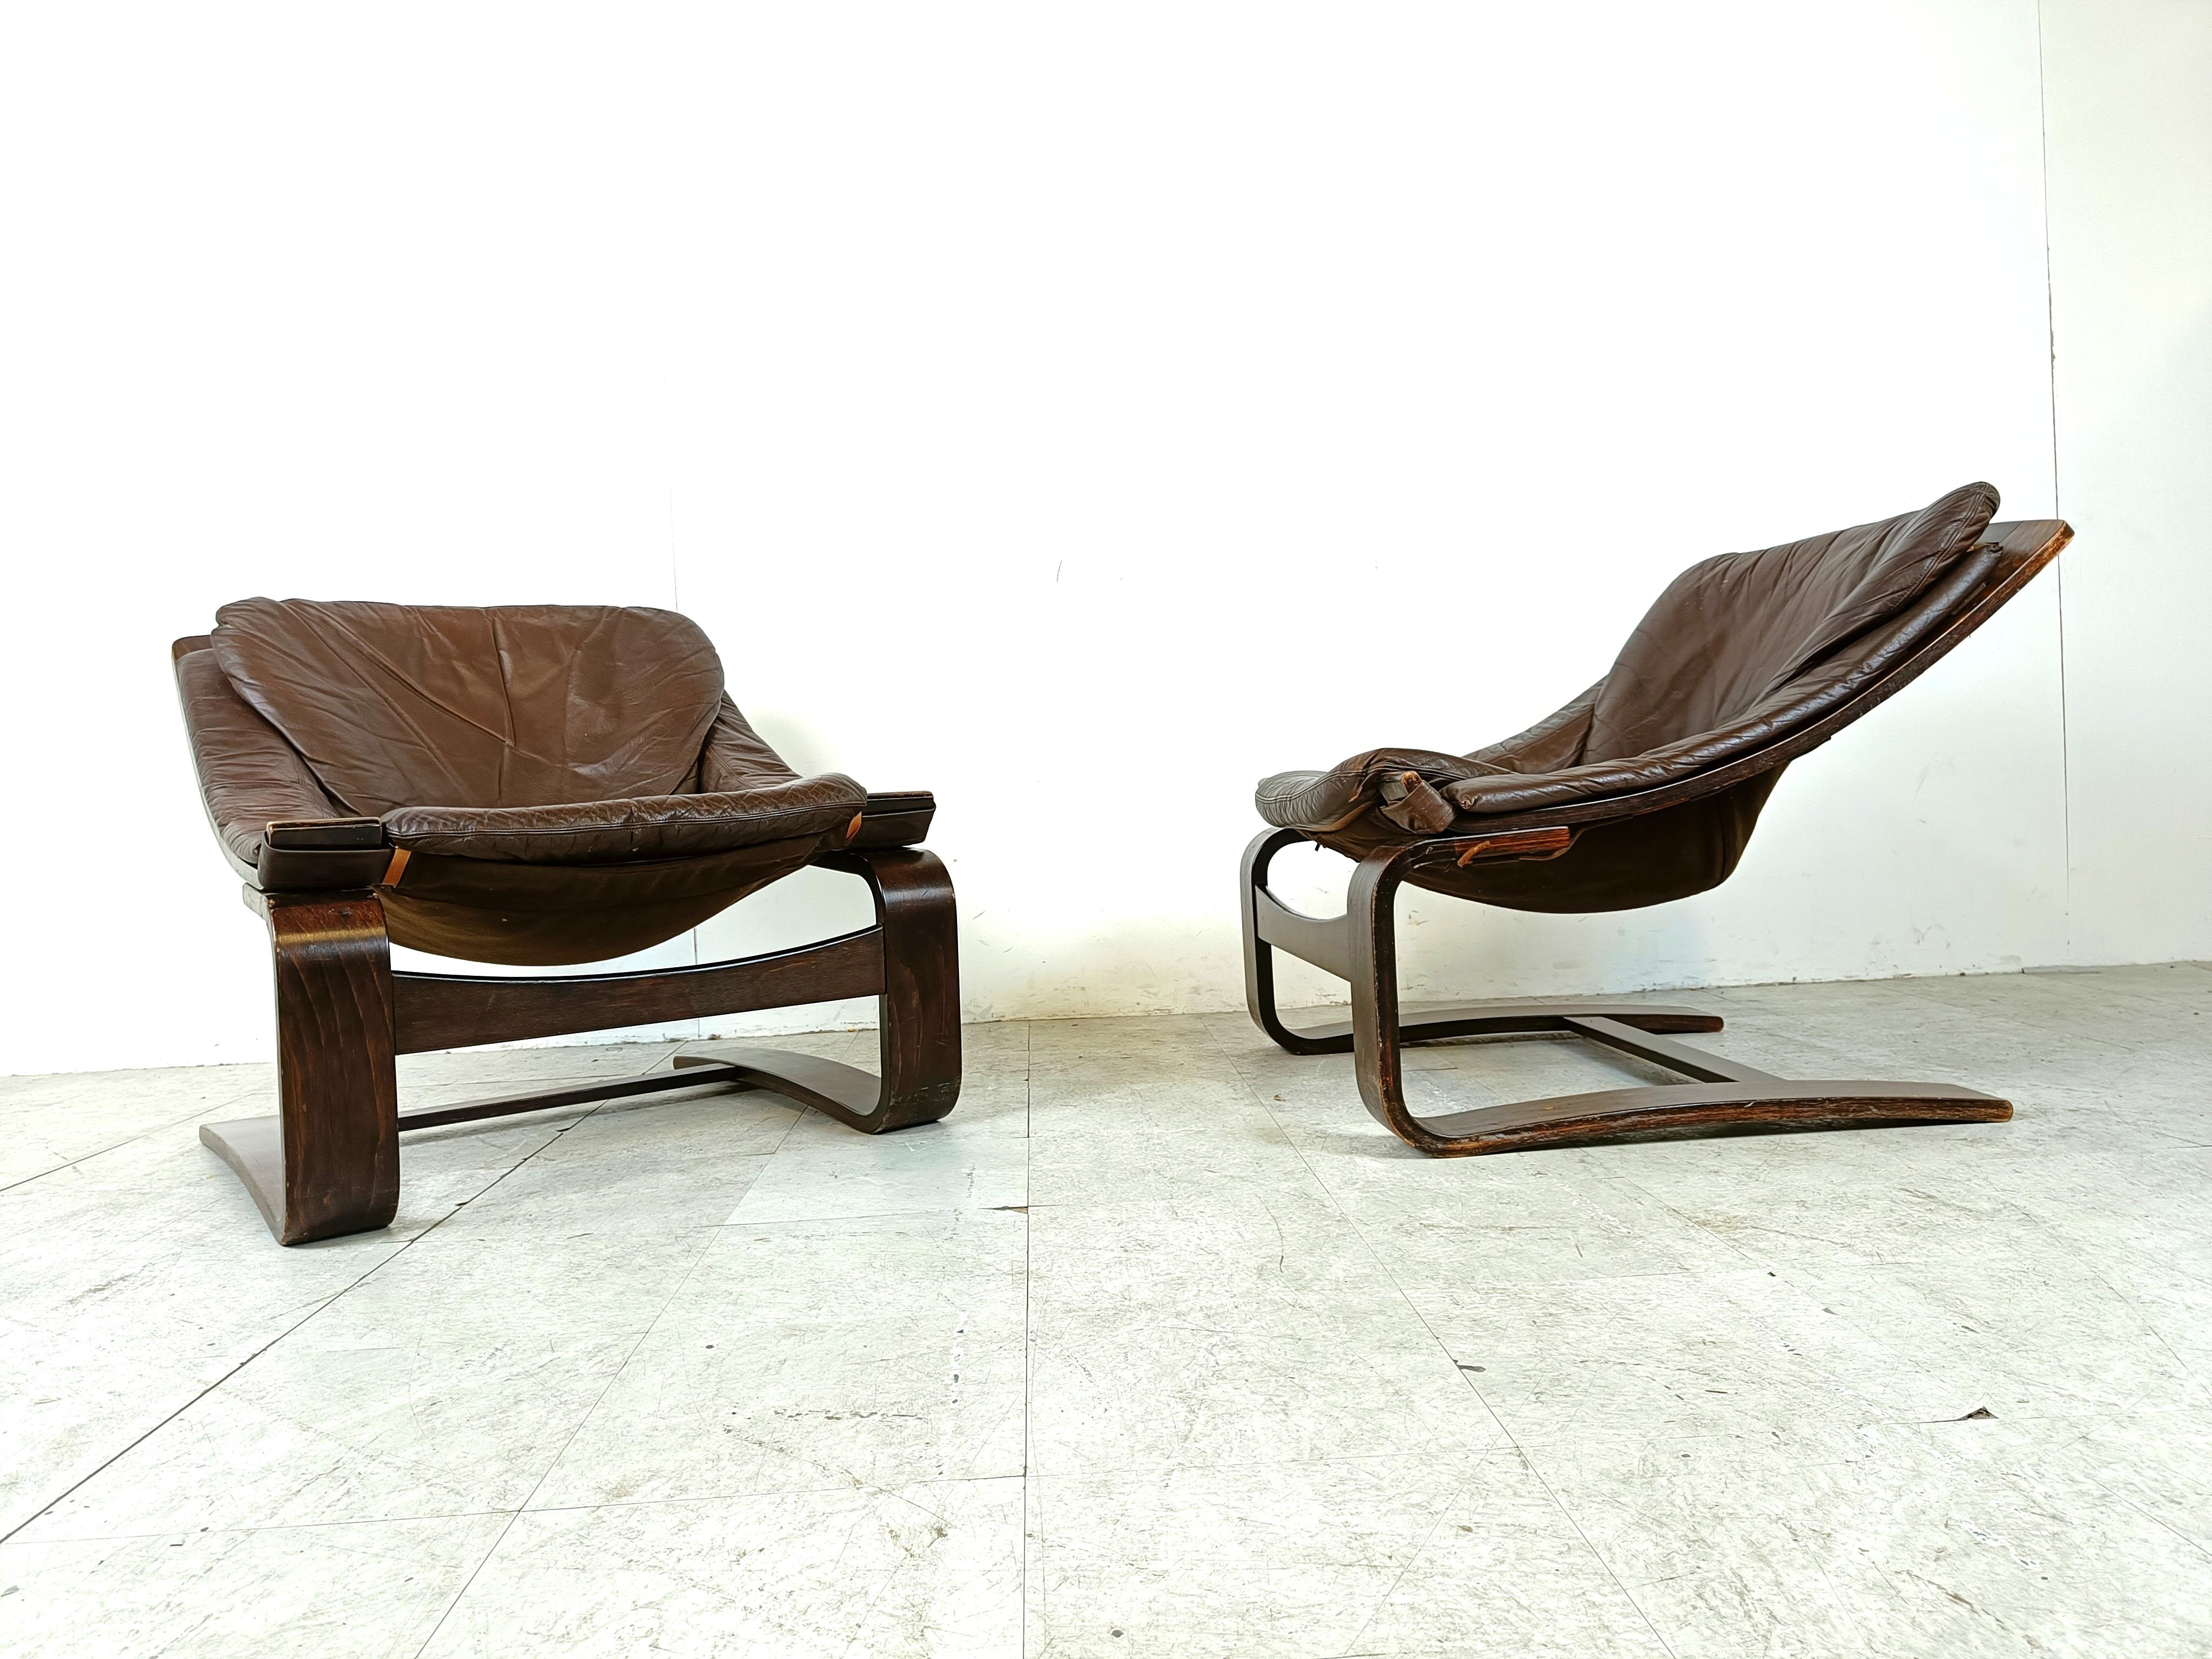 Late 20th Century Swedish Kroken Armchairs by Ake Fribyter for Nelo Möbel, 1970s, set of 2 For Sale